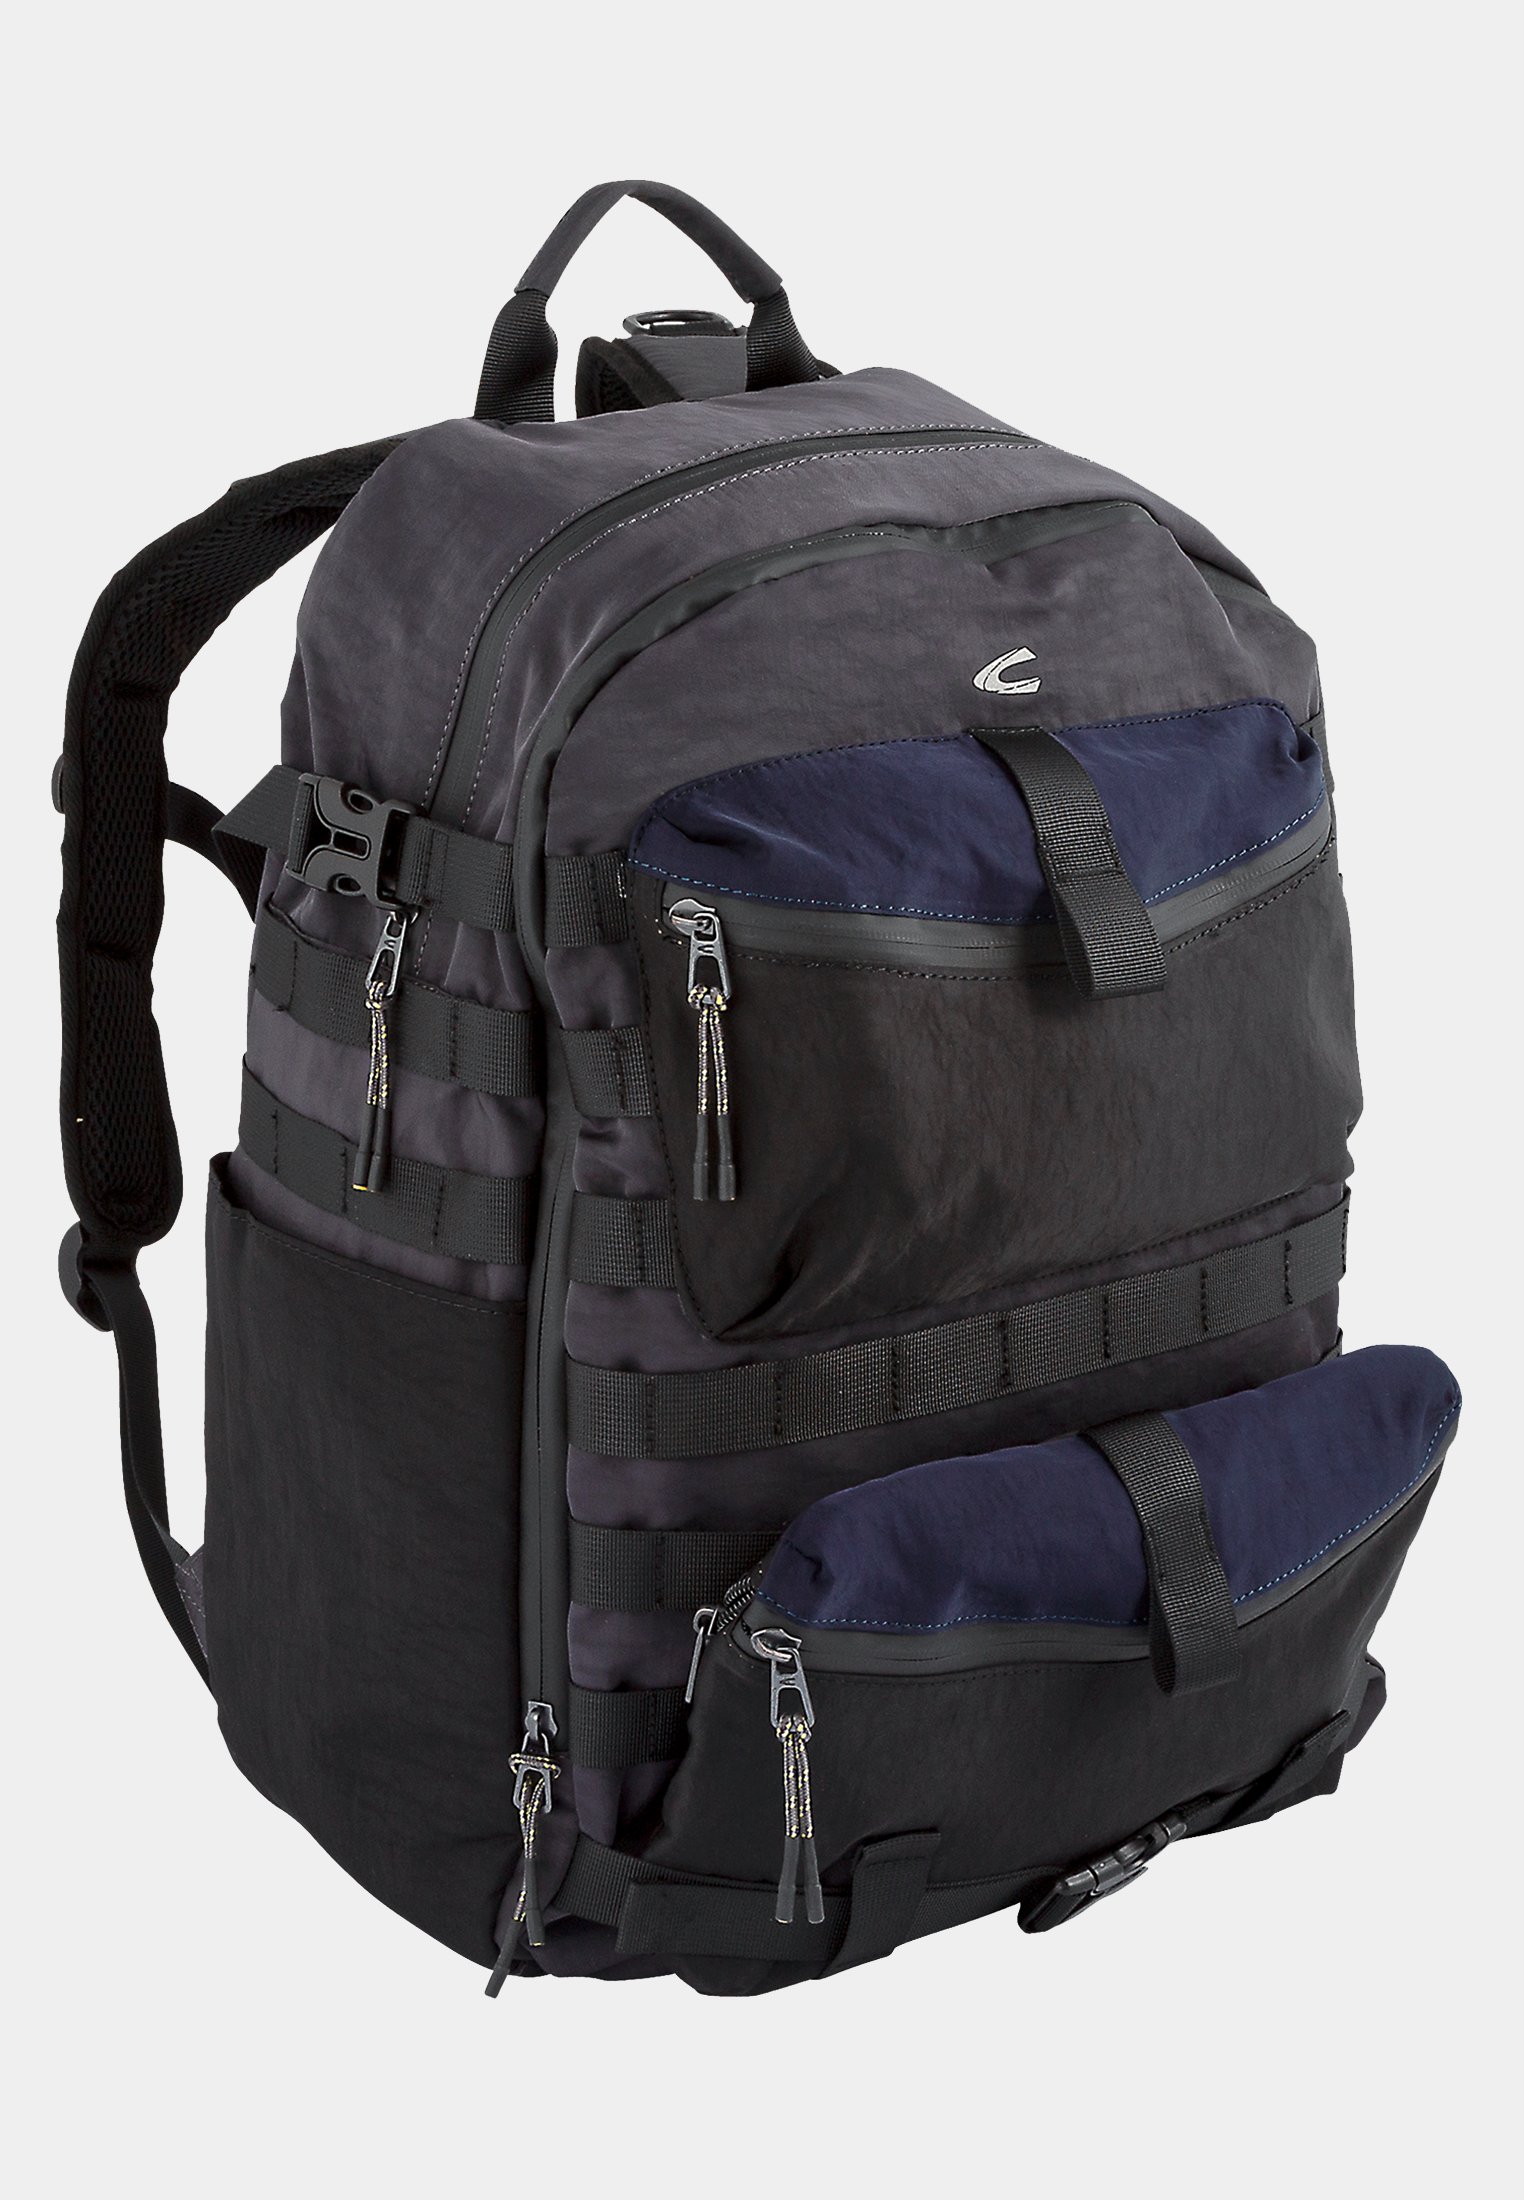 Camel Active Backpack with padded laptop compartment